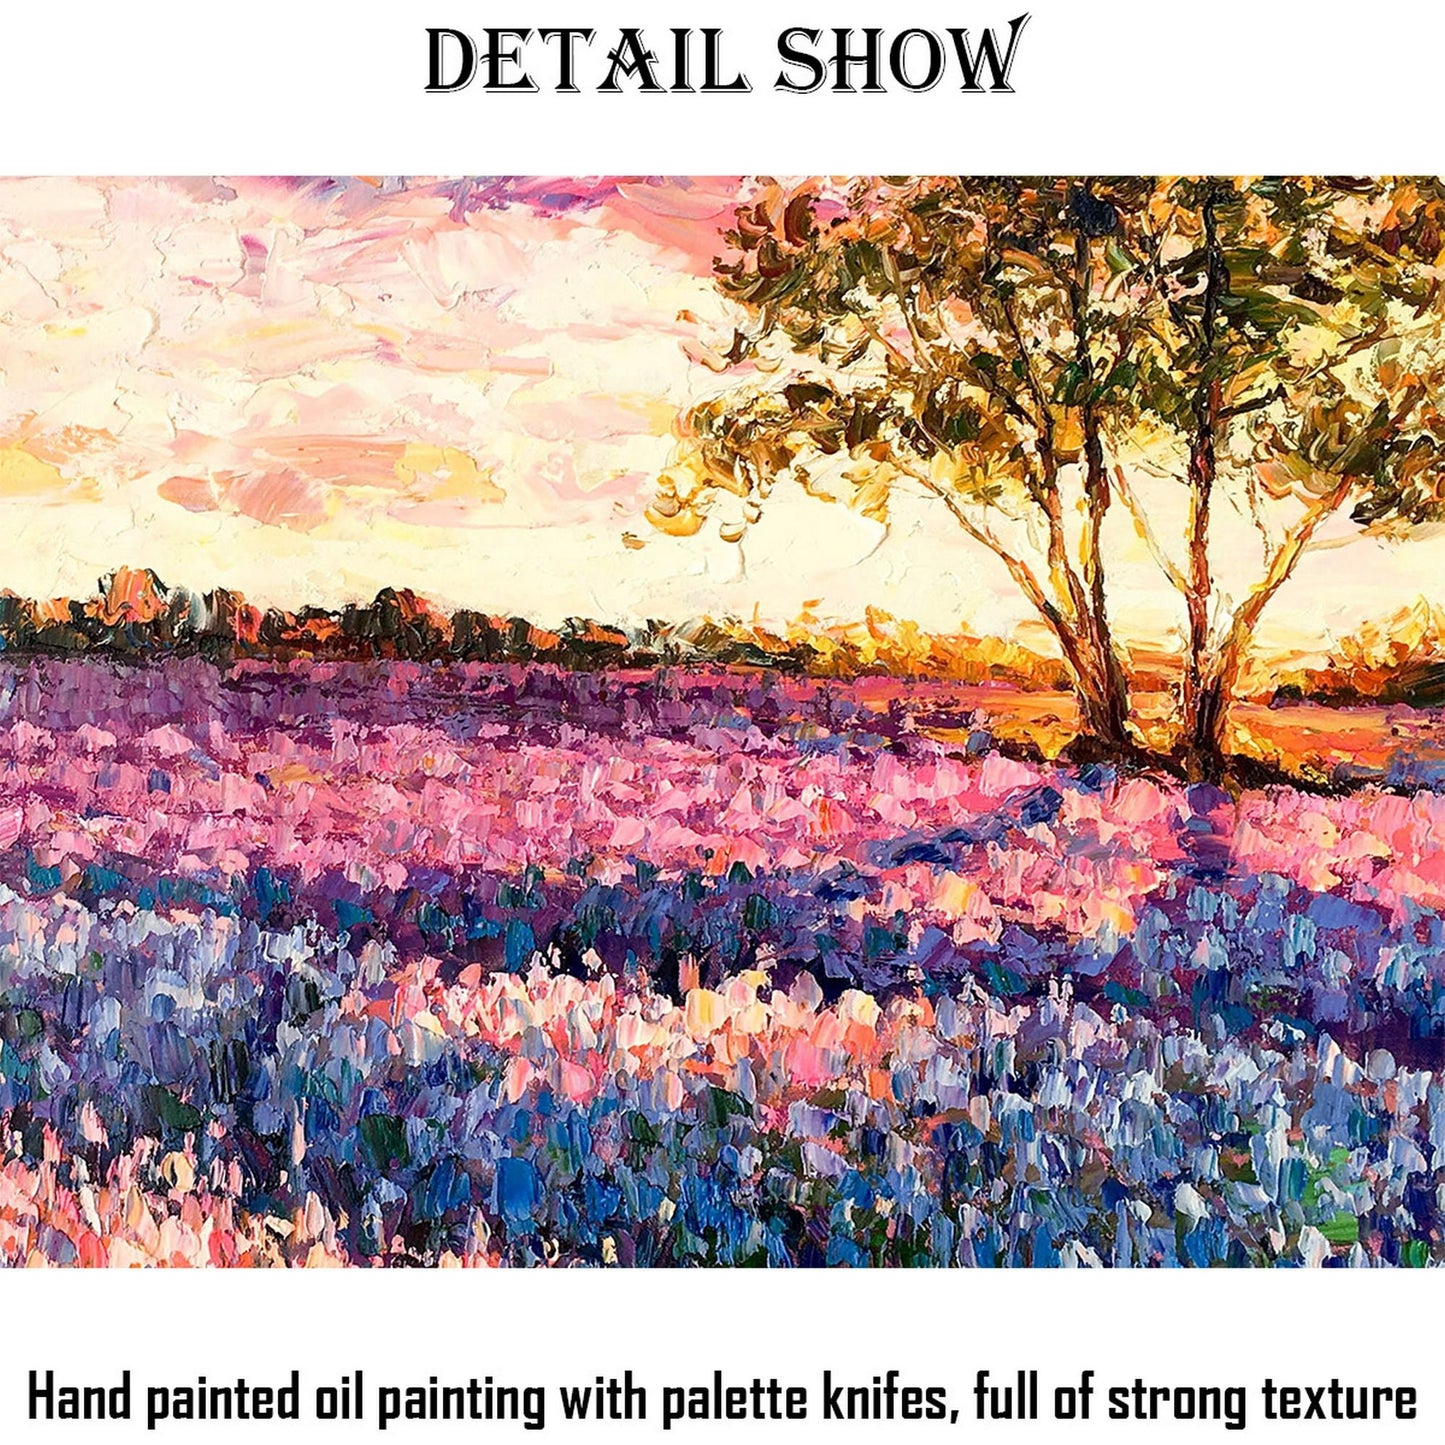 Landscape Oil Paintings Italian Tuscany Lavender Fields at Dawn, Modern Painting, Family Wall Decor, Canvas Painting, Painting Abstract